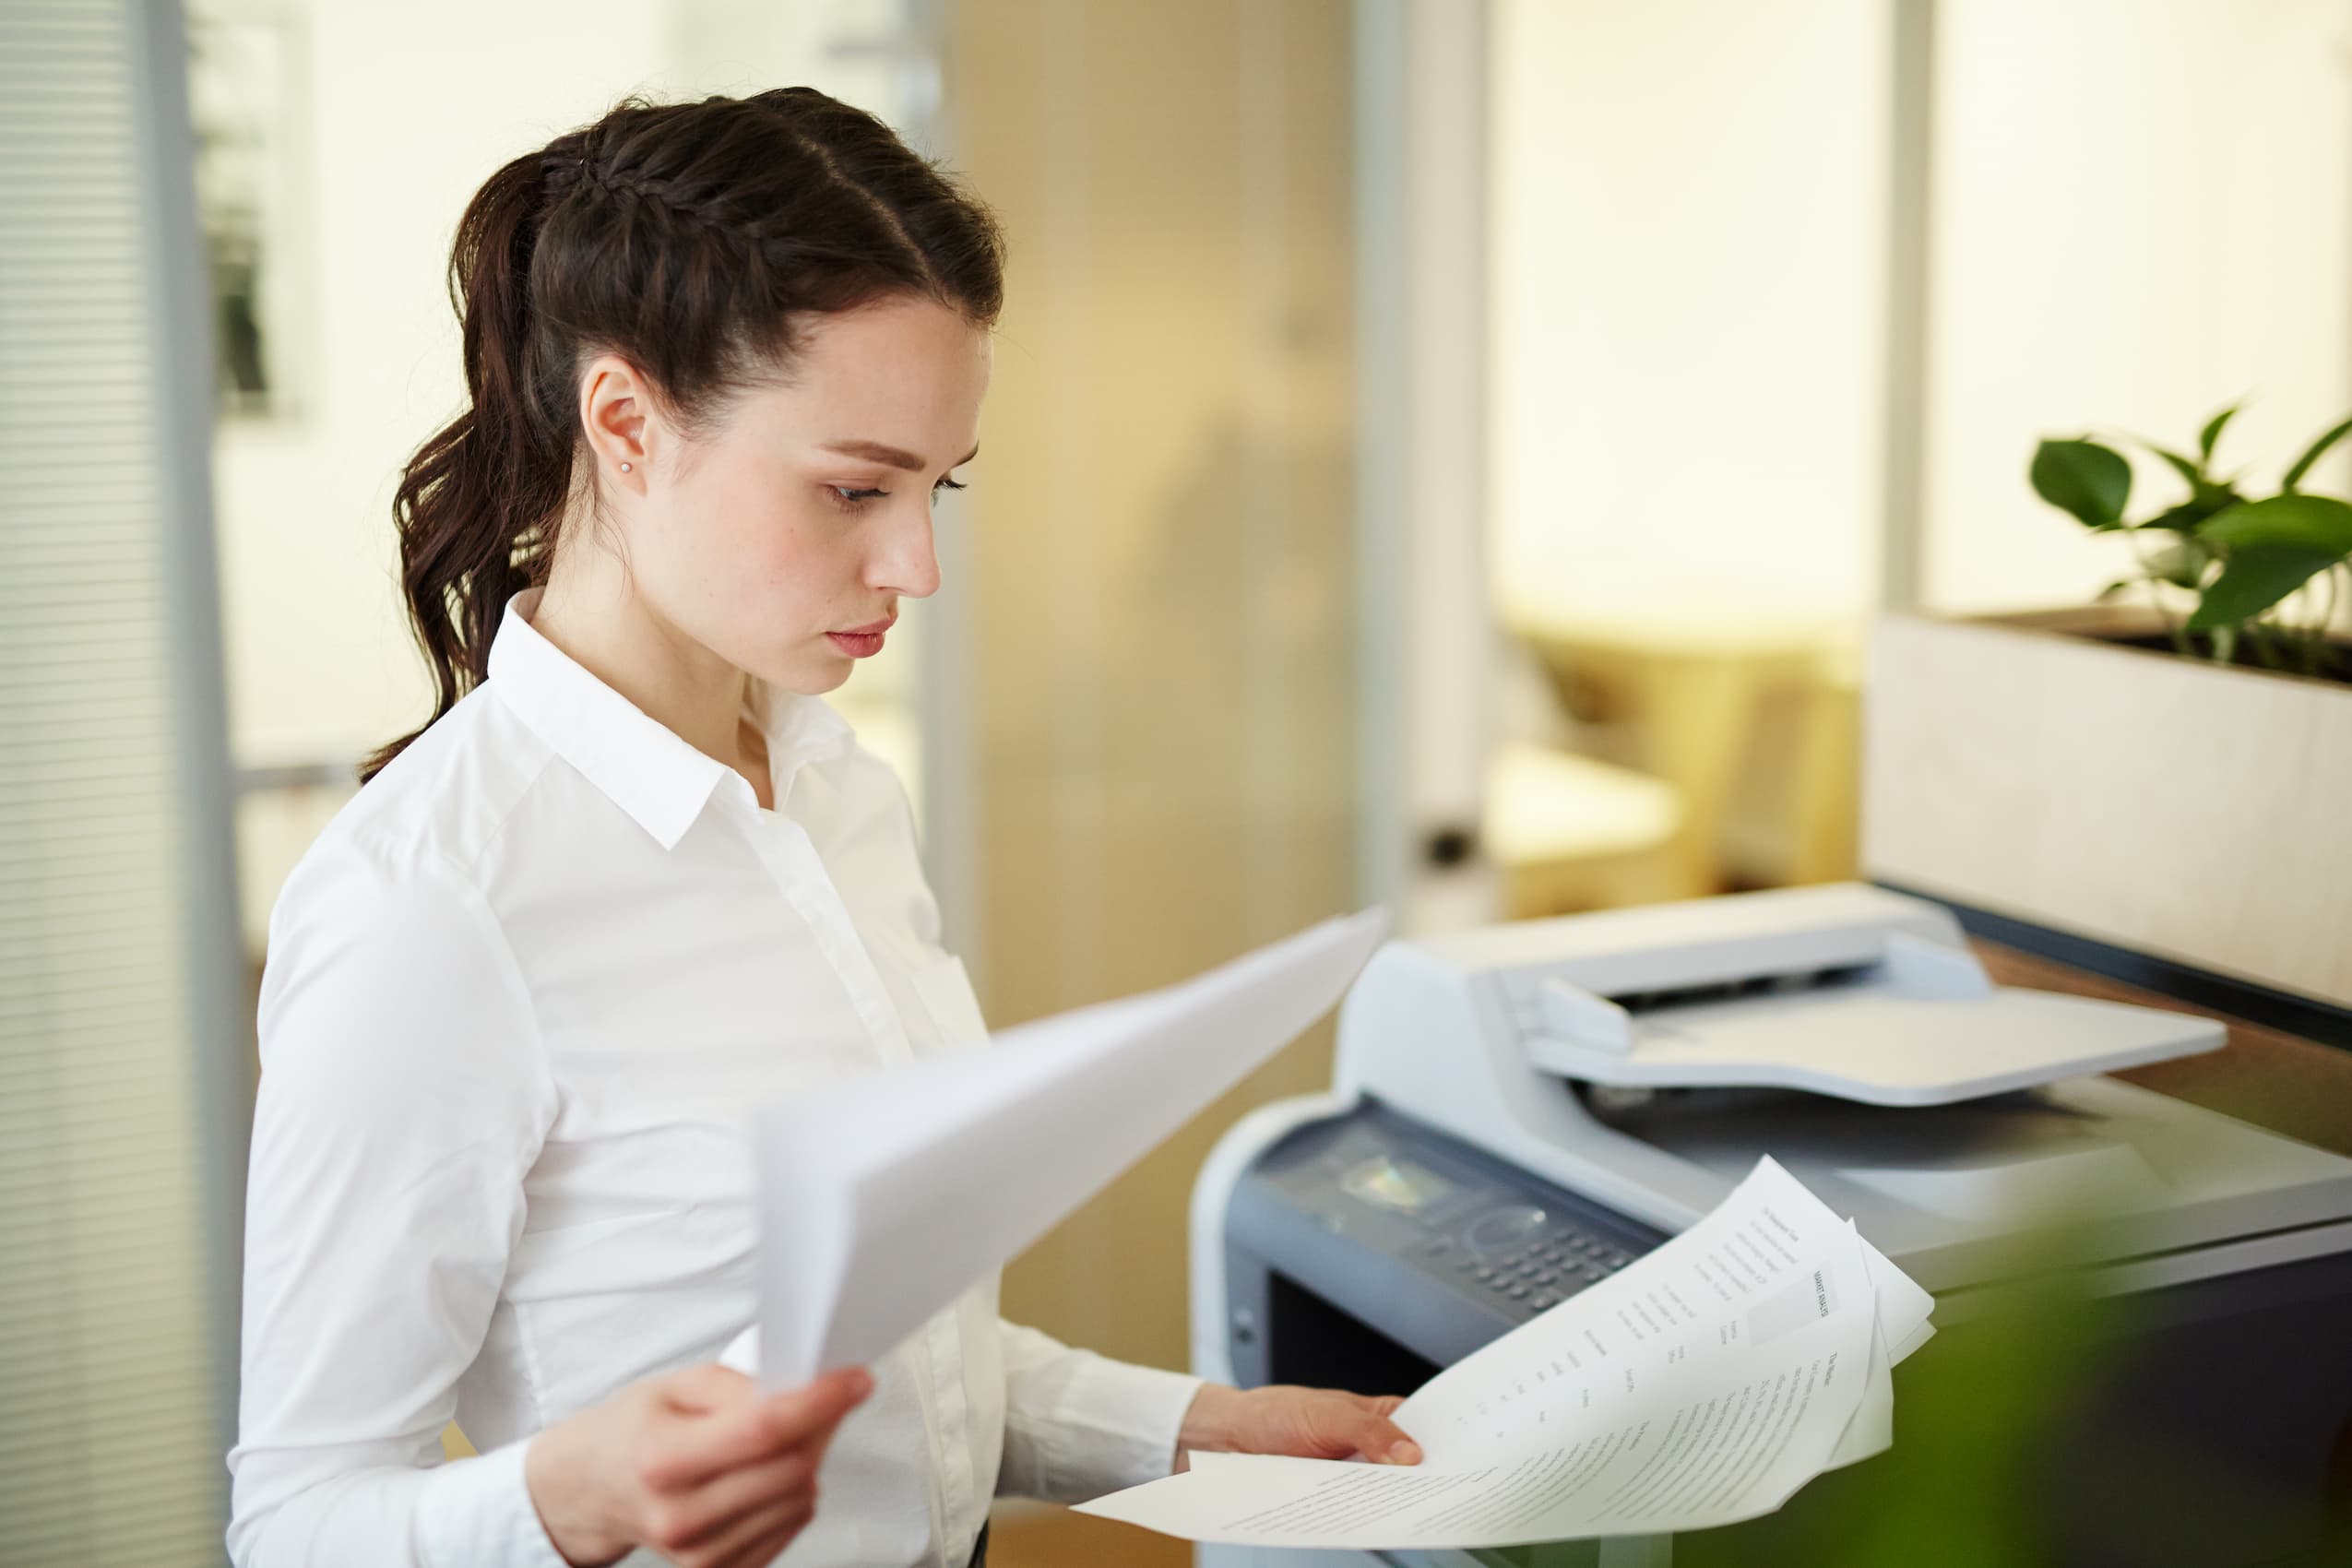 Digitize Your Company Document with Ease secretary work